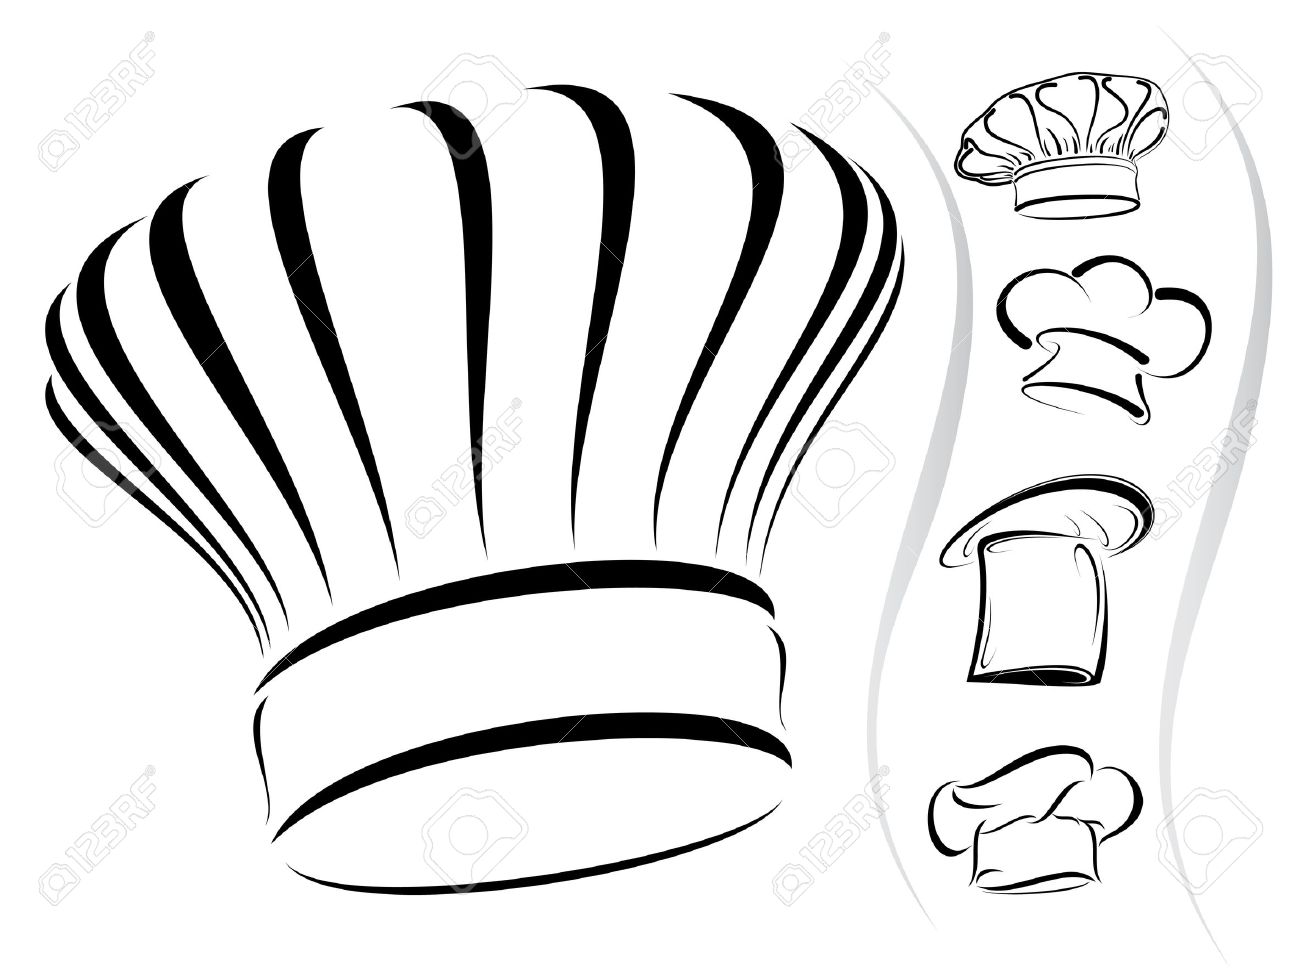 Five chef hat silhouettes.